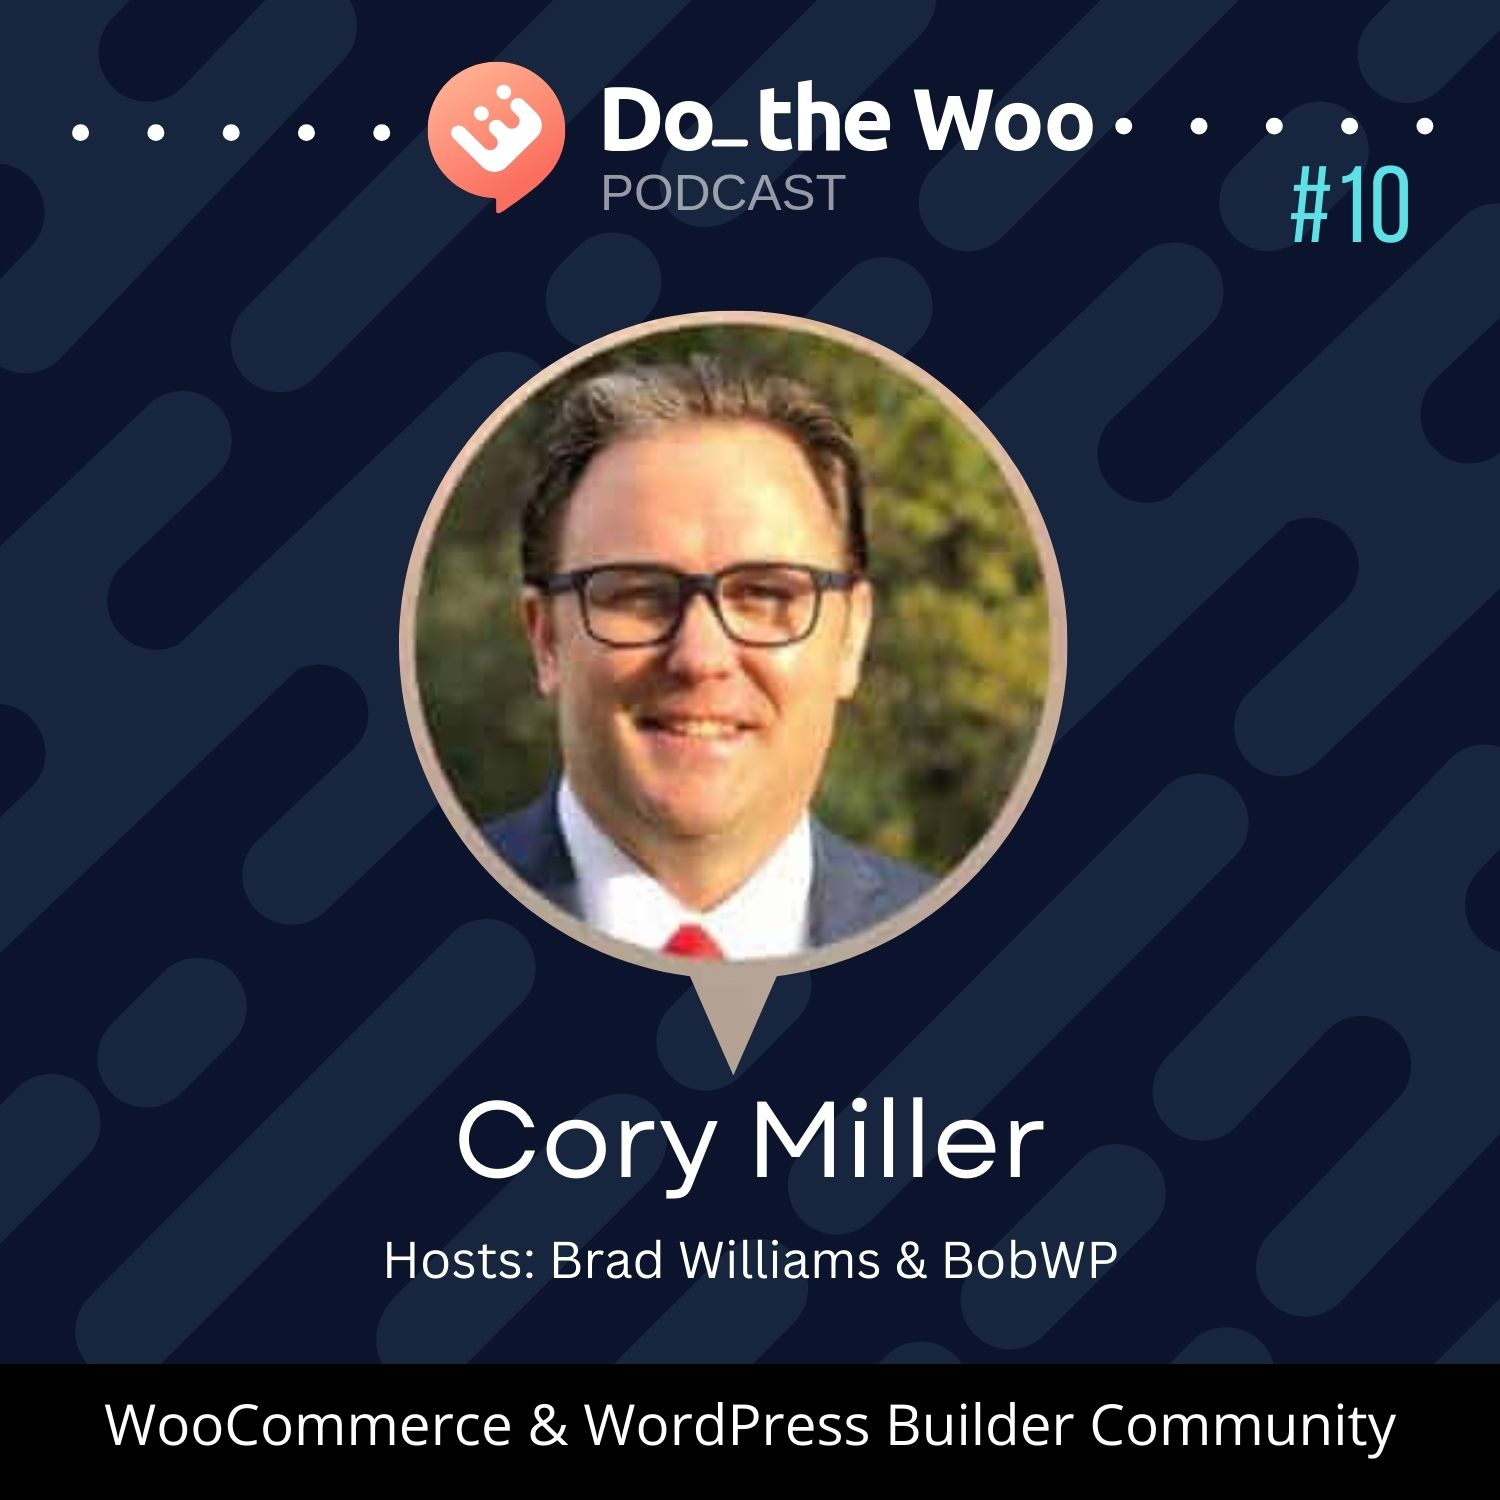 2019 Predictions, Headless eCommerce and In-store Pickup with Cory Miller